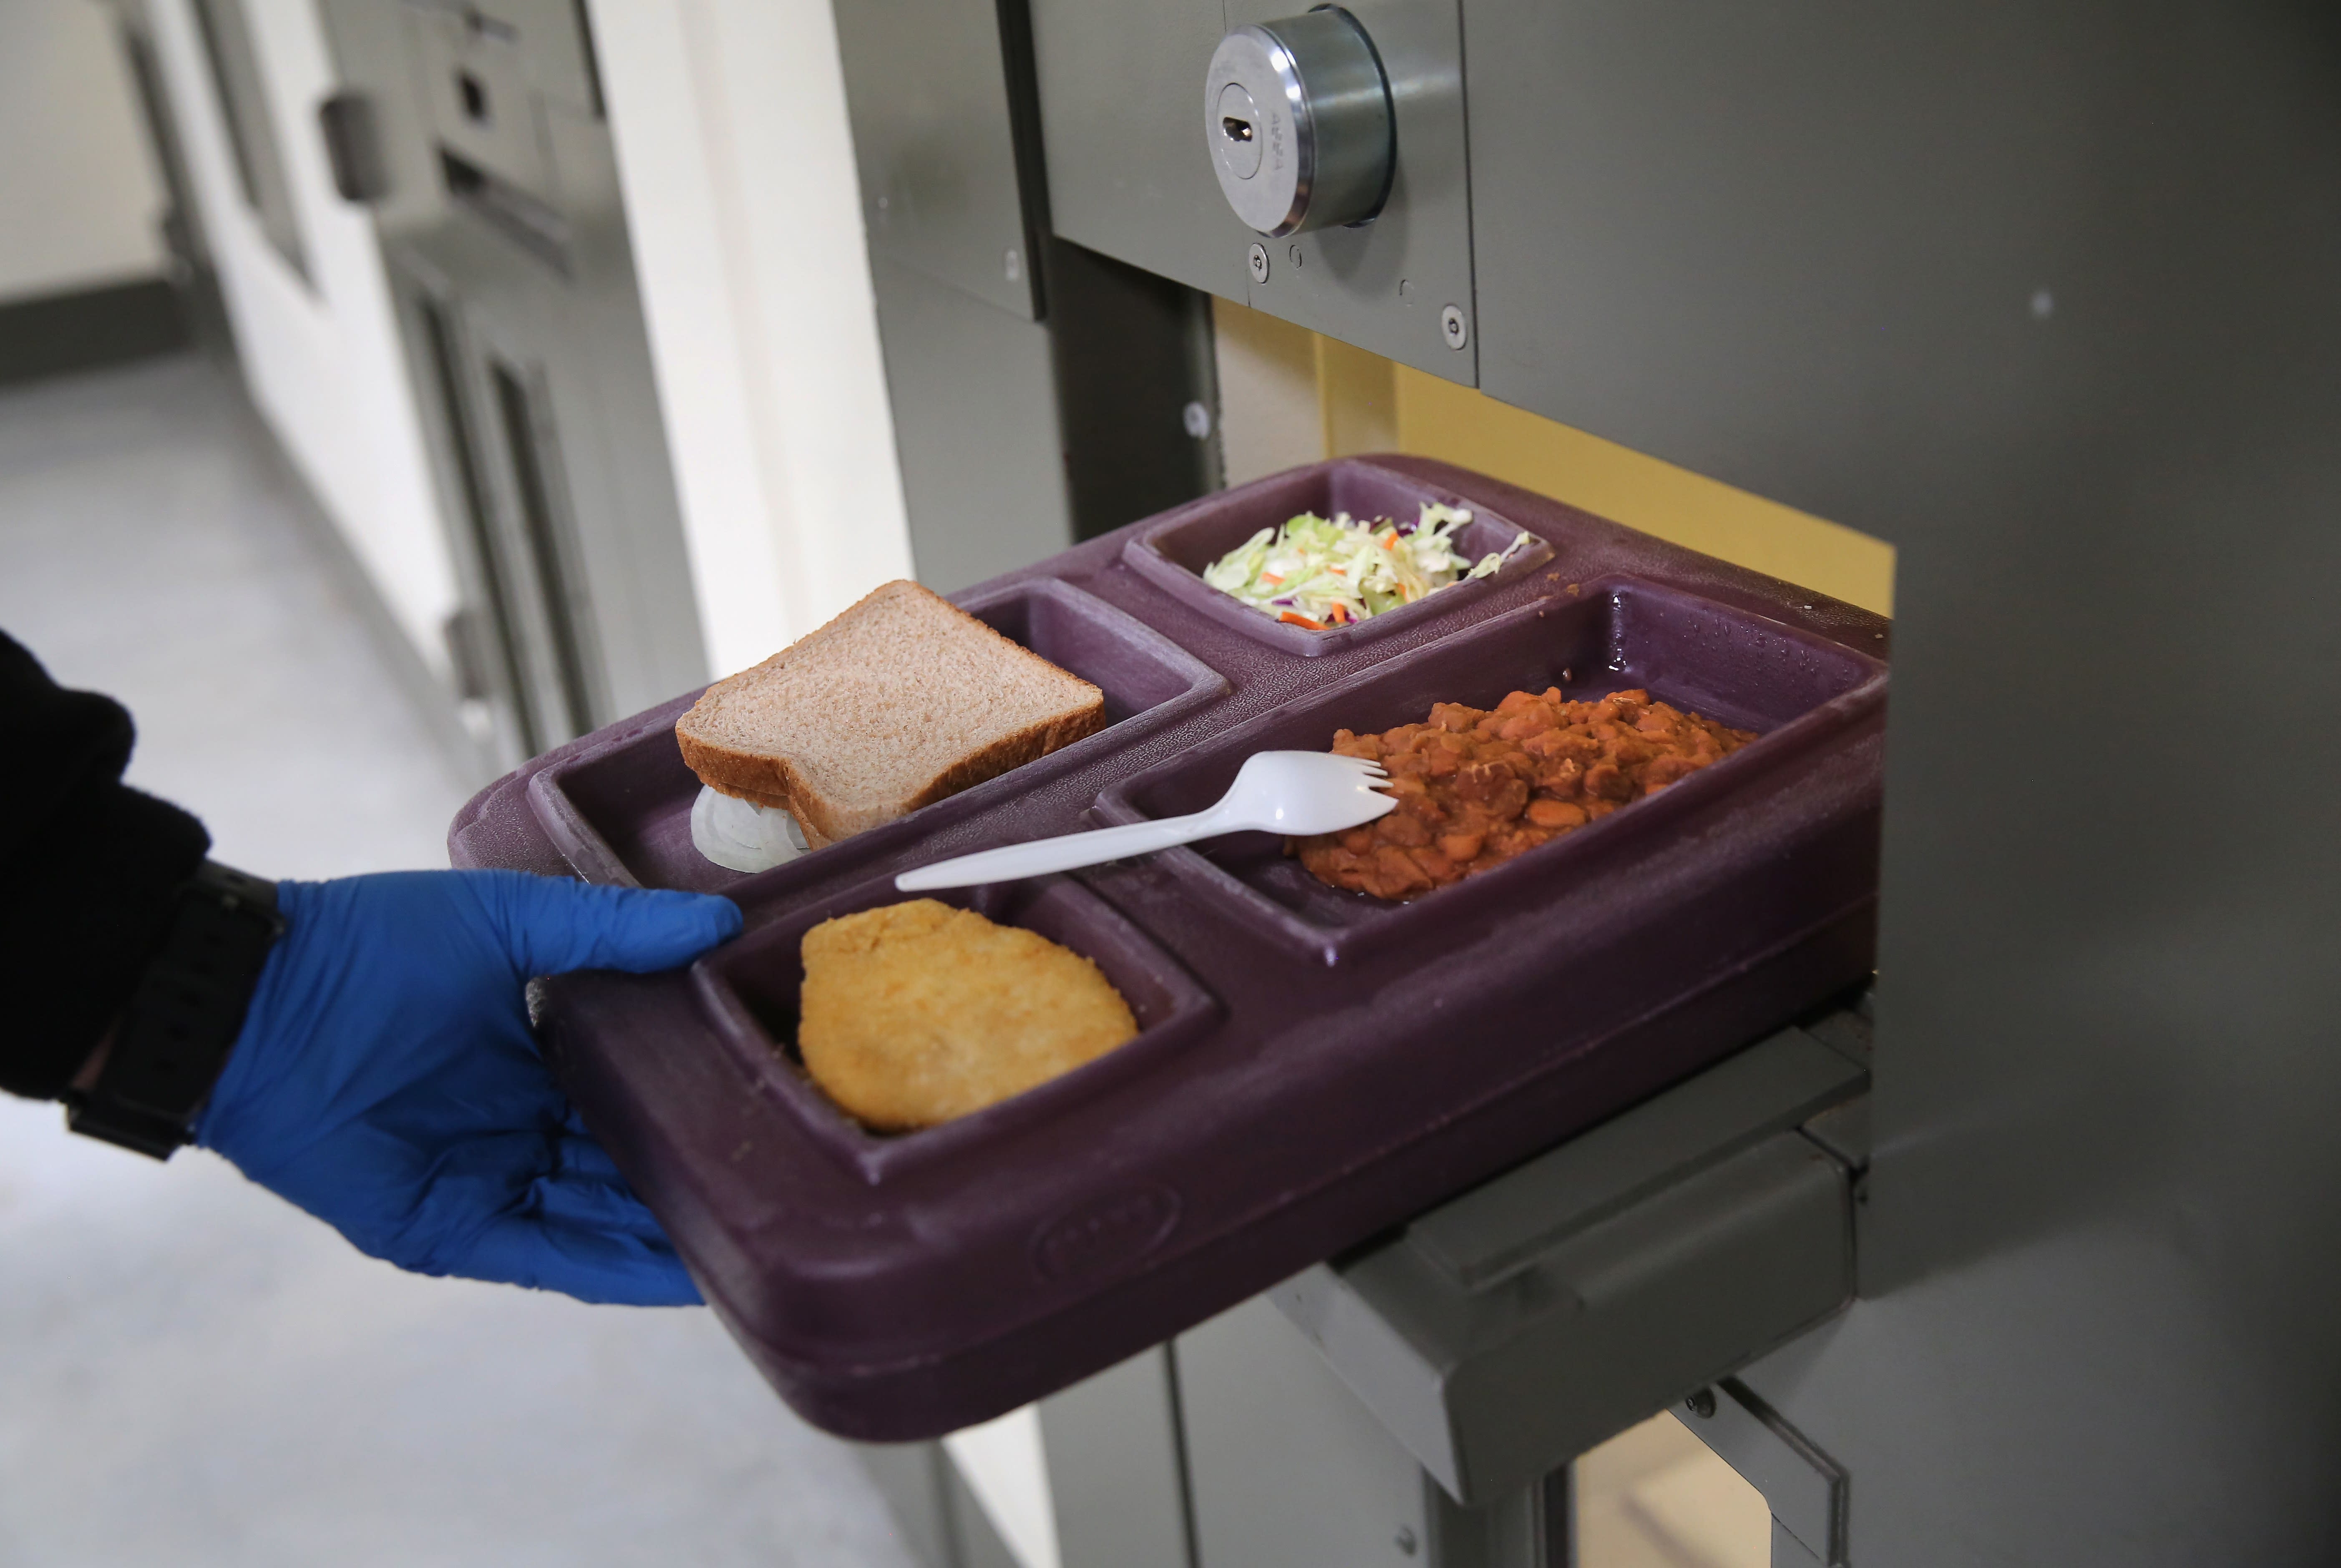 Prison Meals Have Nothing to Do with the Government Shutdown